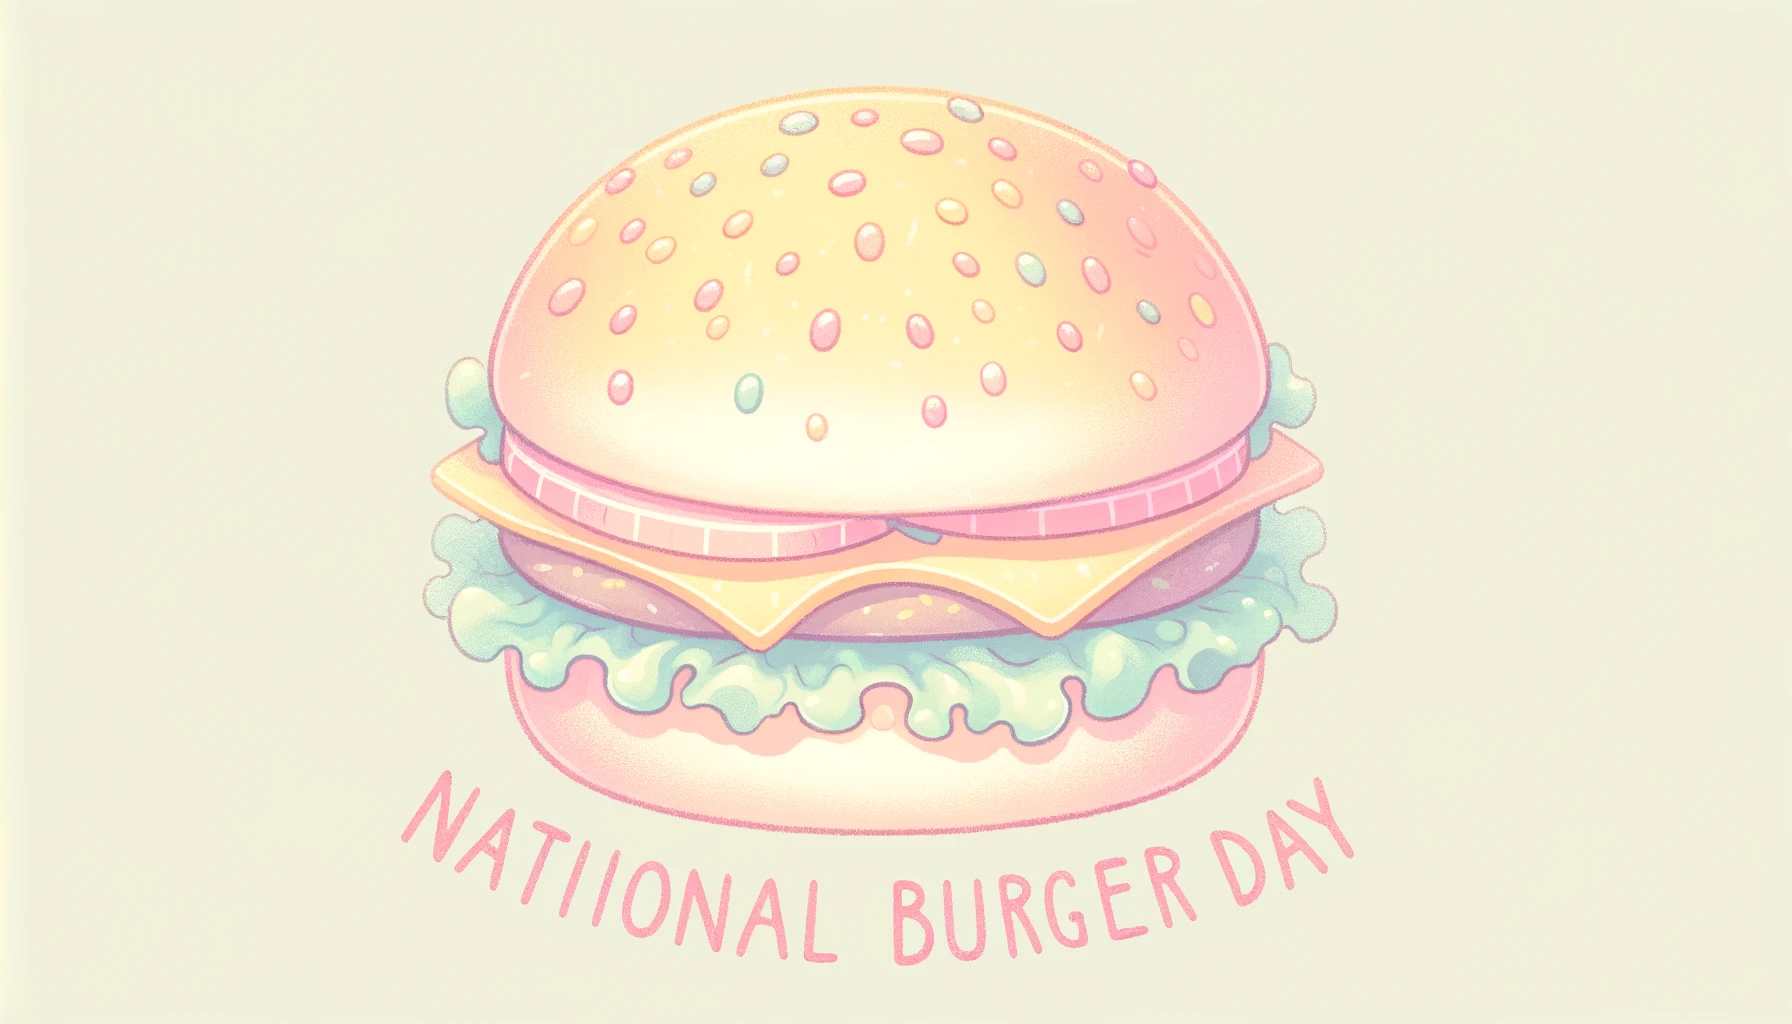 Savory National Burger Day Messages for Everyone